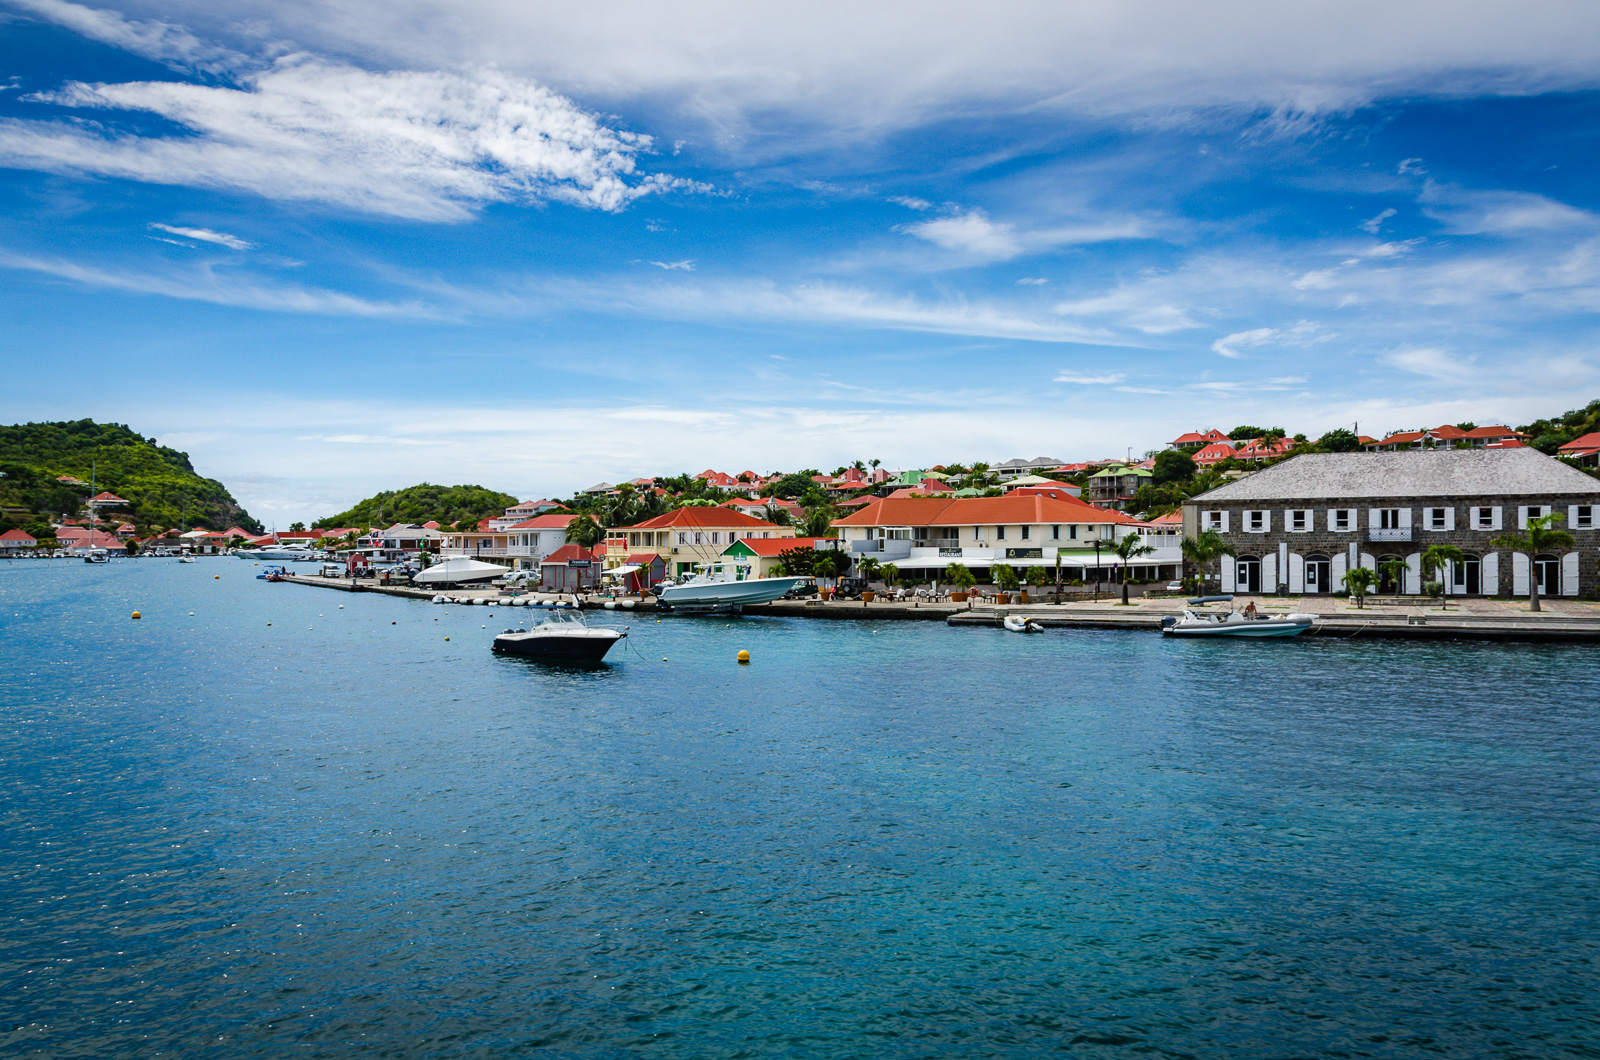 View of shops and buildings in town, Gustavia, St. Barthelemy (St